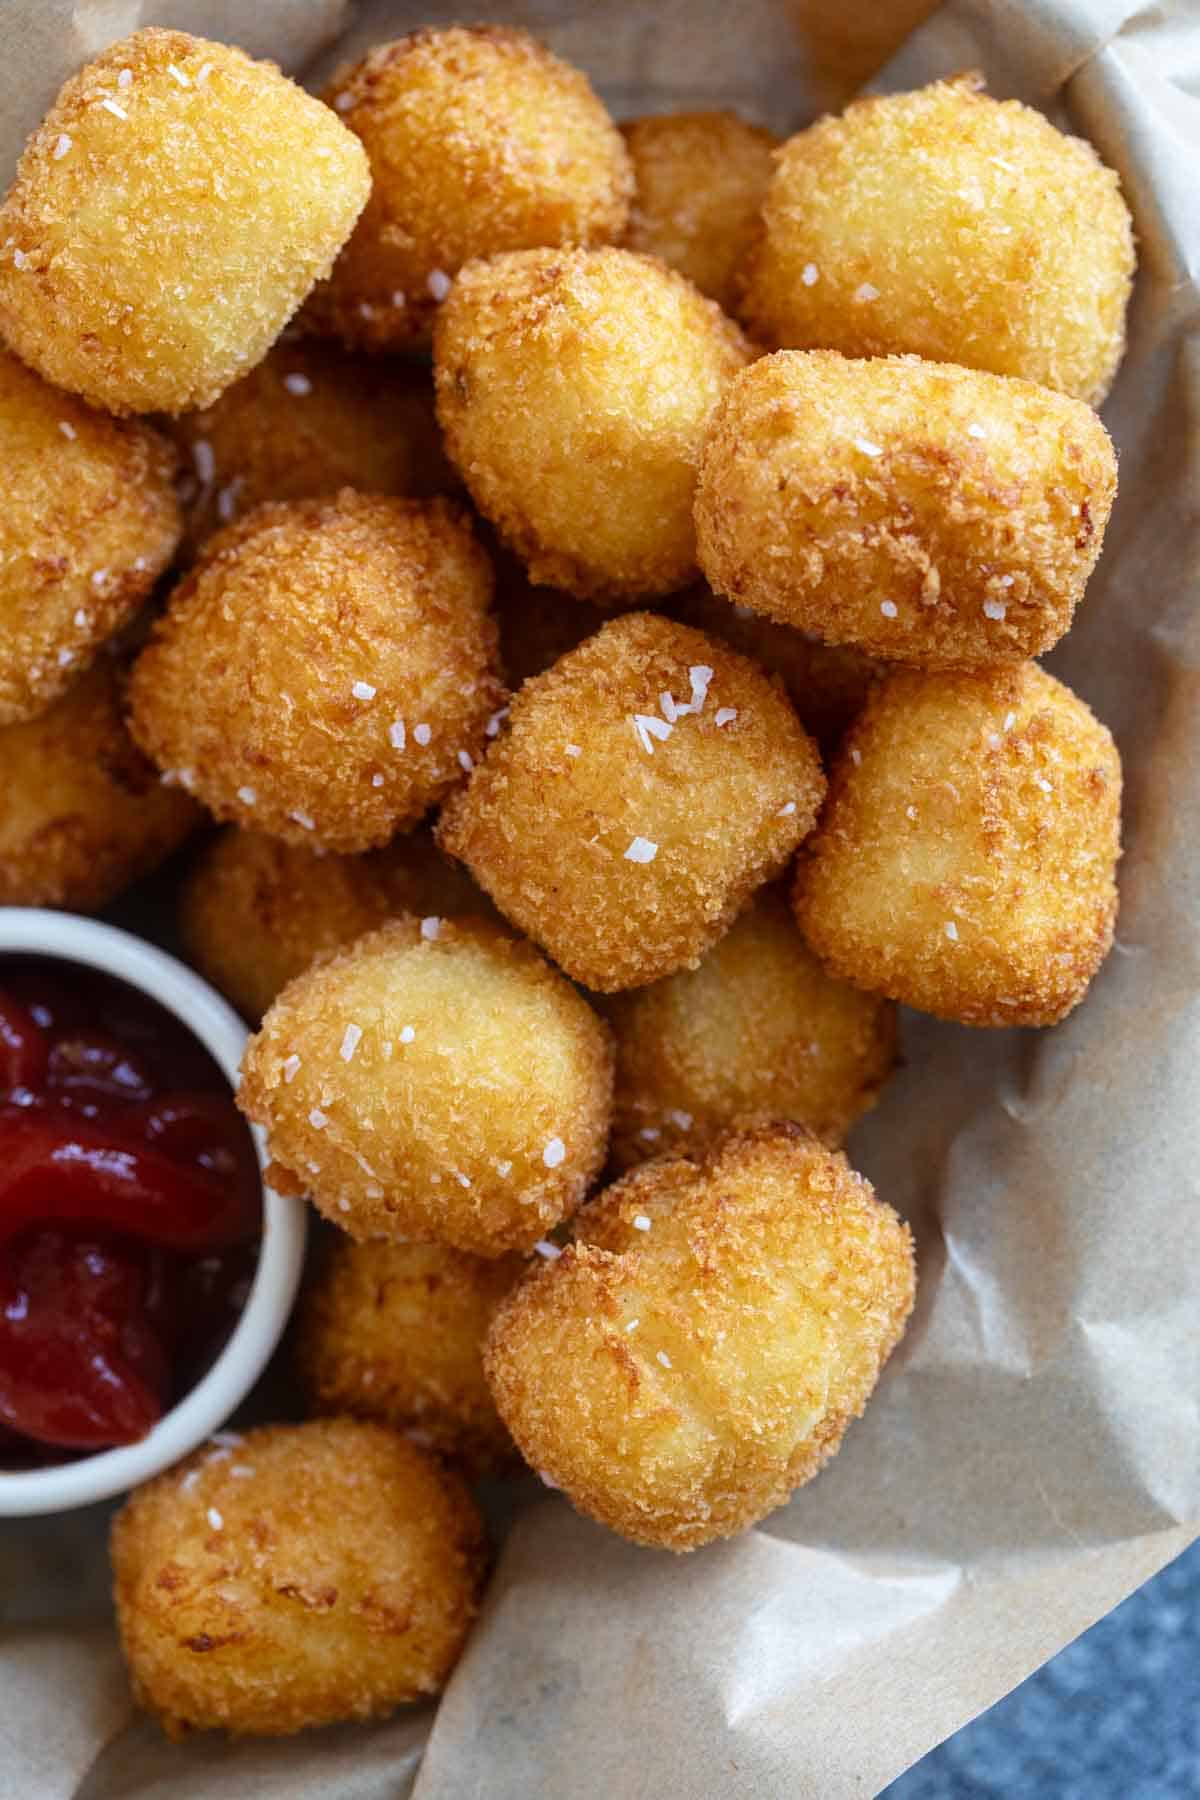 Basket filled with homemade tater tots and ketchup.